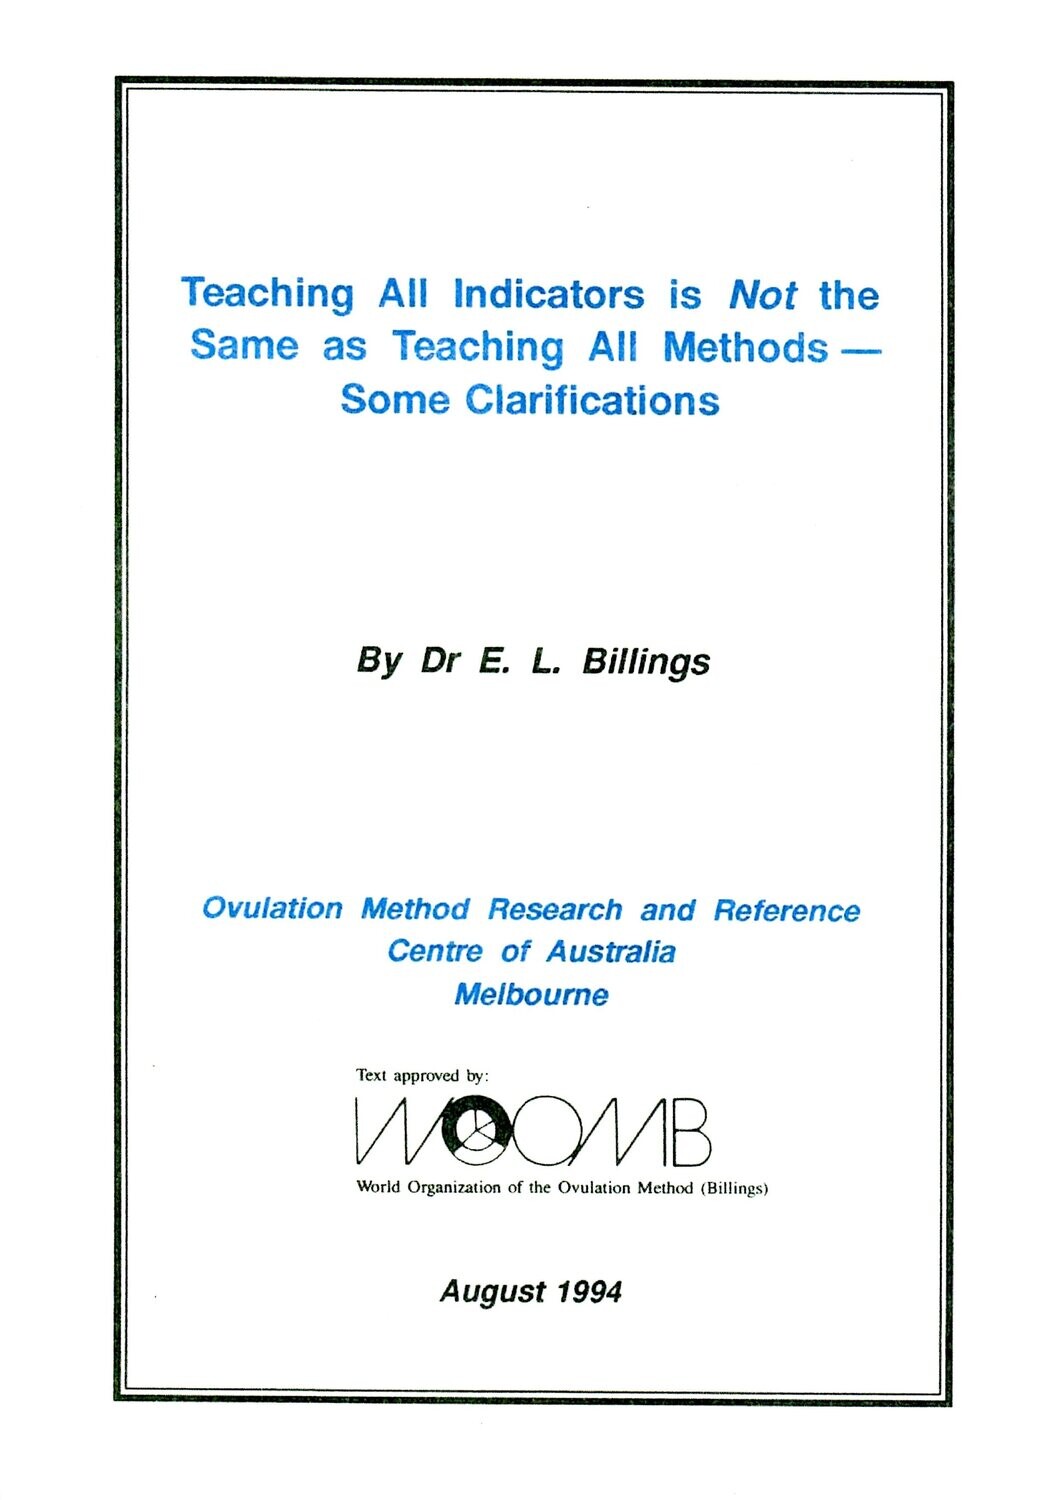 Teaching All Indicators is Not the Same as Teaching All Methods - Some Clarifications by Dr Lyn Billings (August 1994). Download